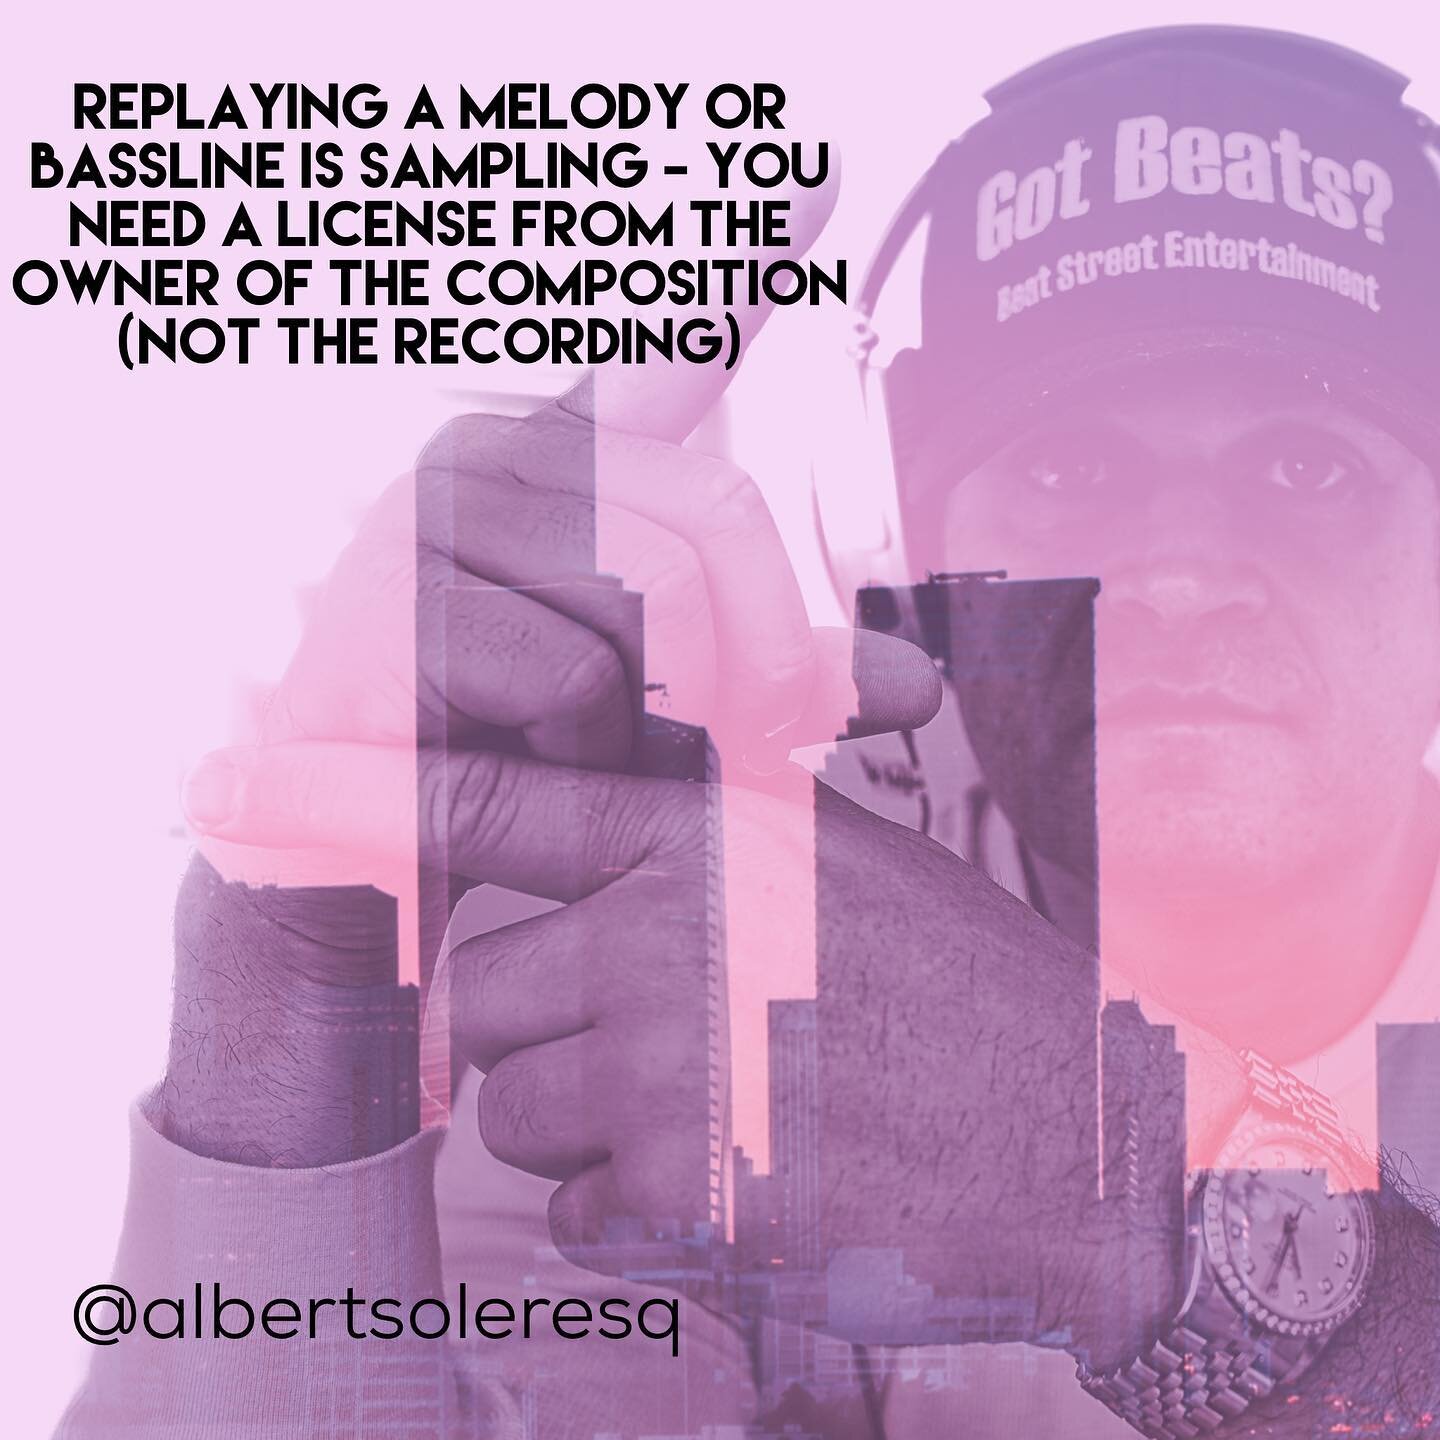 Artists - When you replay a melody or a bassline from a song that&rsquo;s a form of sampling called an &ldquo;interpolation,&rdquo; which requires a license from the owners of the composition (not the recording). 🙏🏼 

#albertesq #knowyourbusiness #